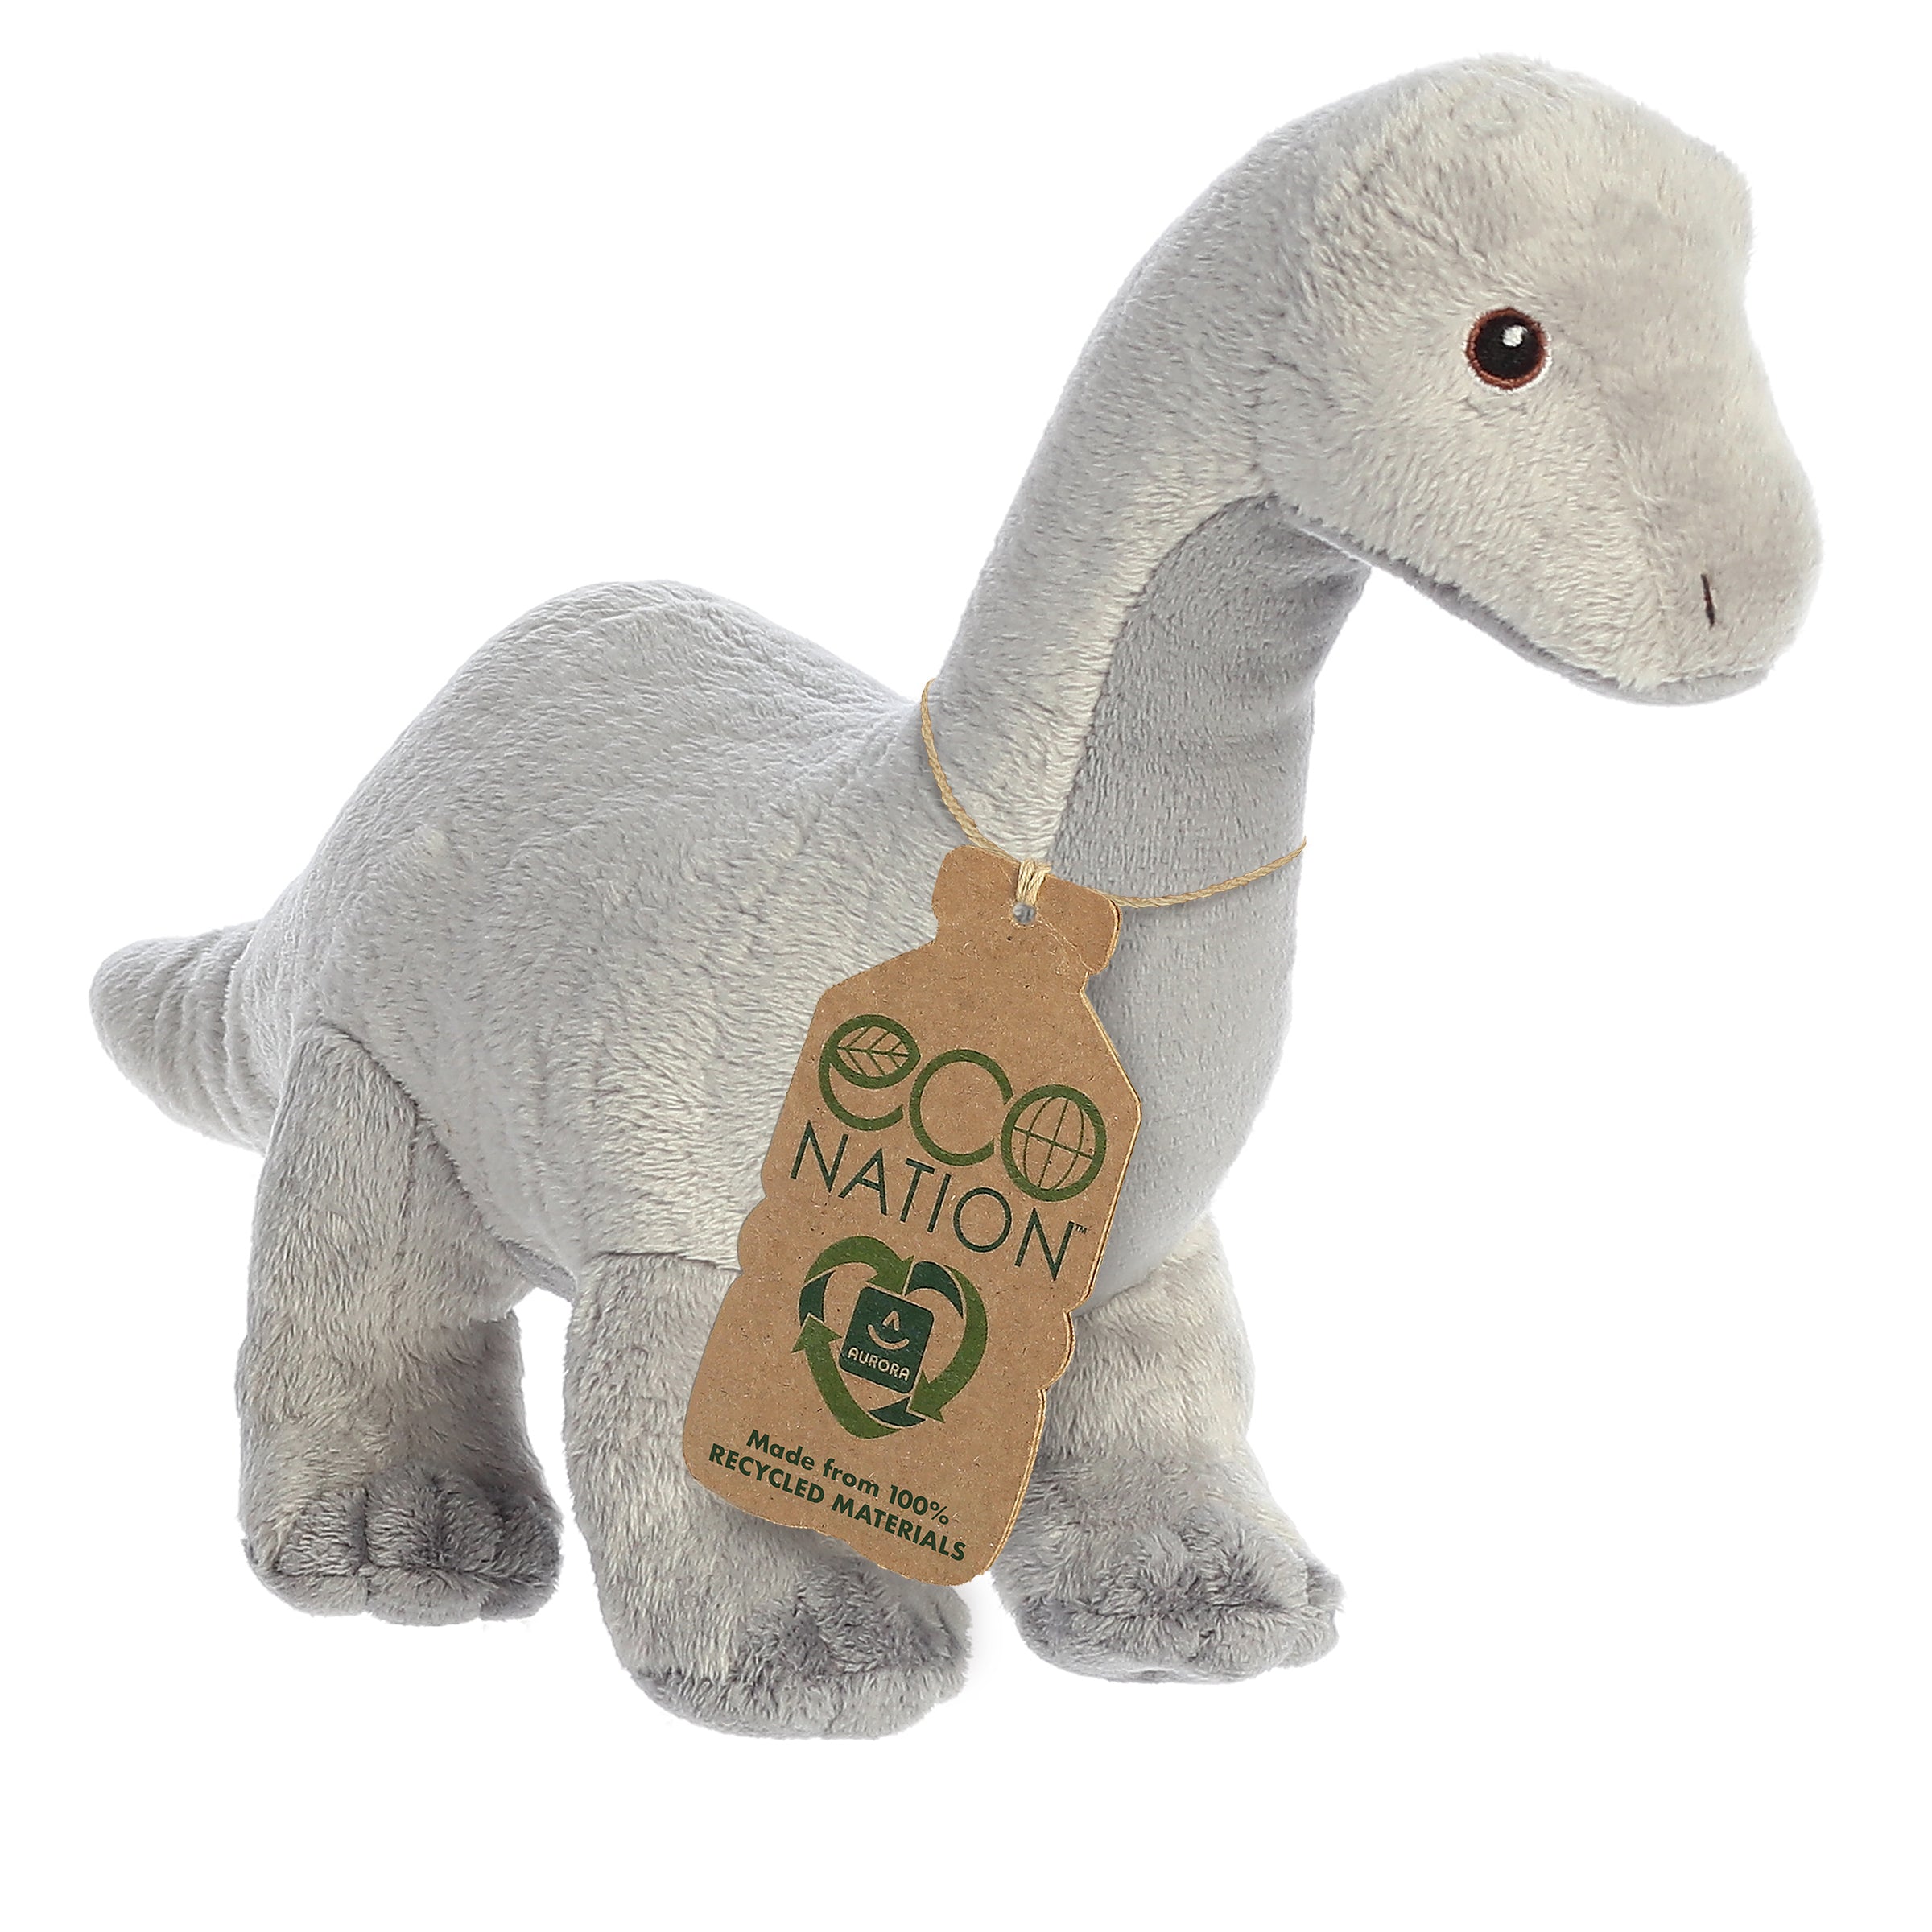 An impressive dino brachiosaurus plush with a grey coat, embroidered eyes, and an eco-nation tag around its long neck.